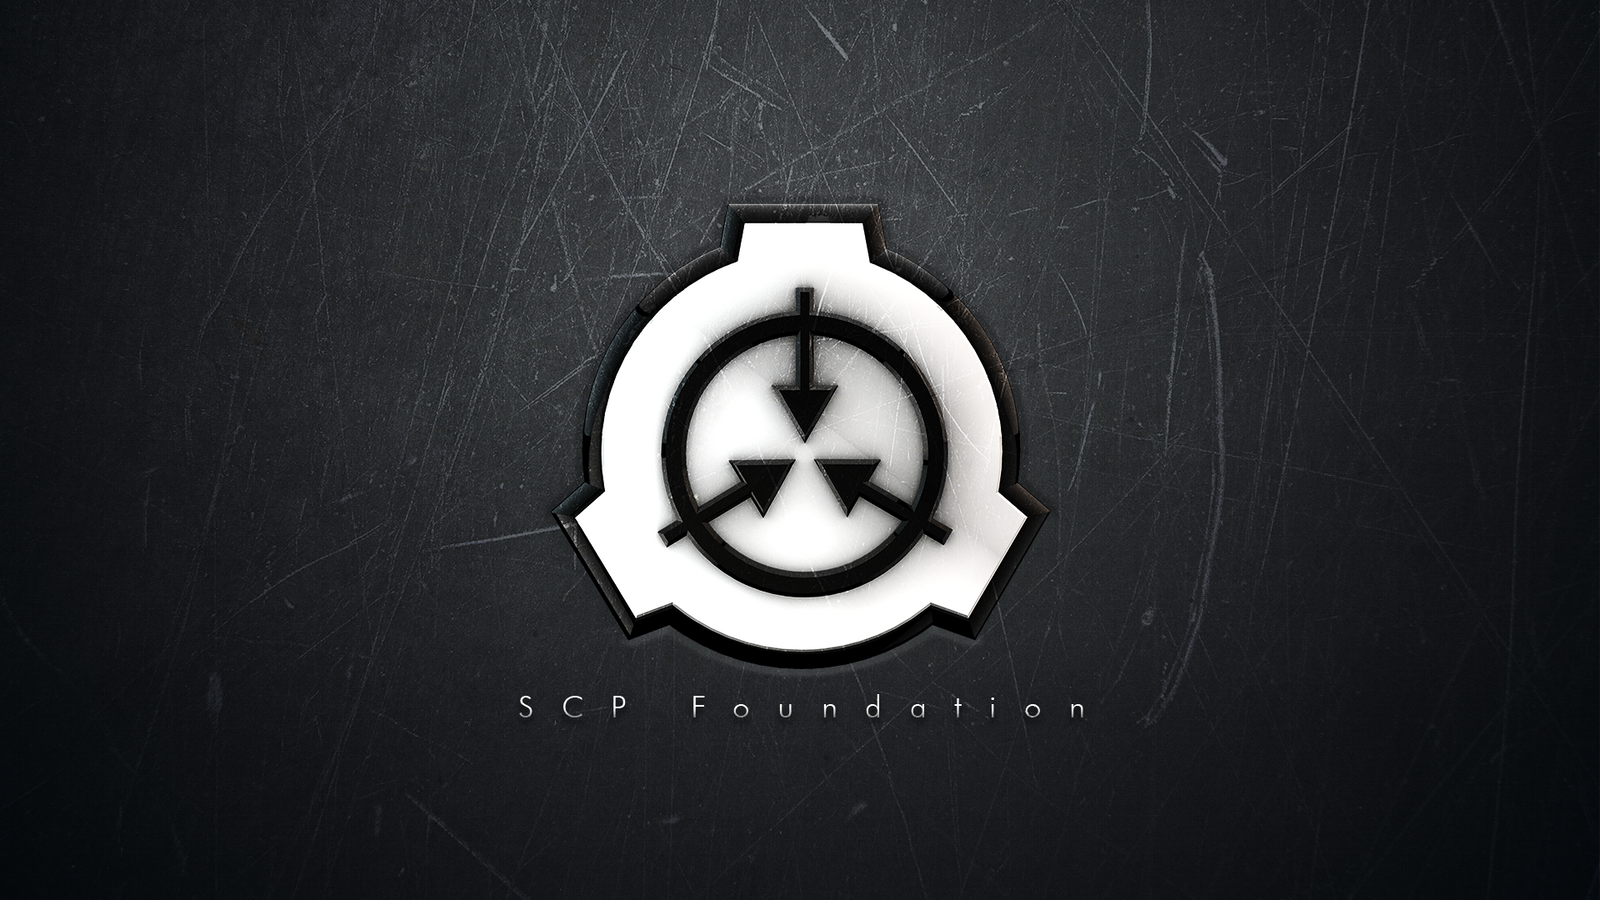 SCP Foundation - 1440x900 Background (Flat Colors) by SonoGioiosa on  DeviantArt